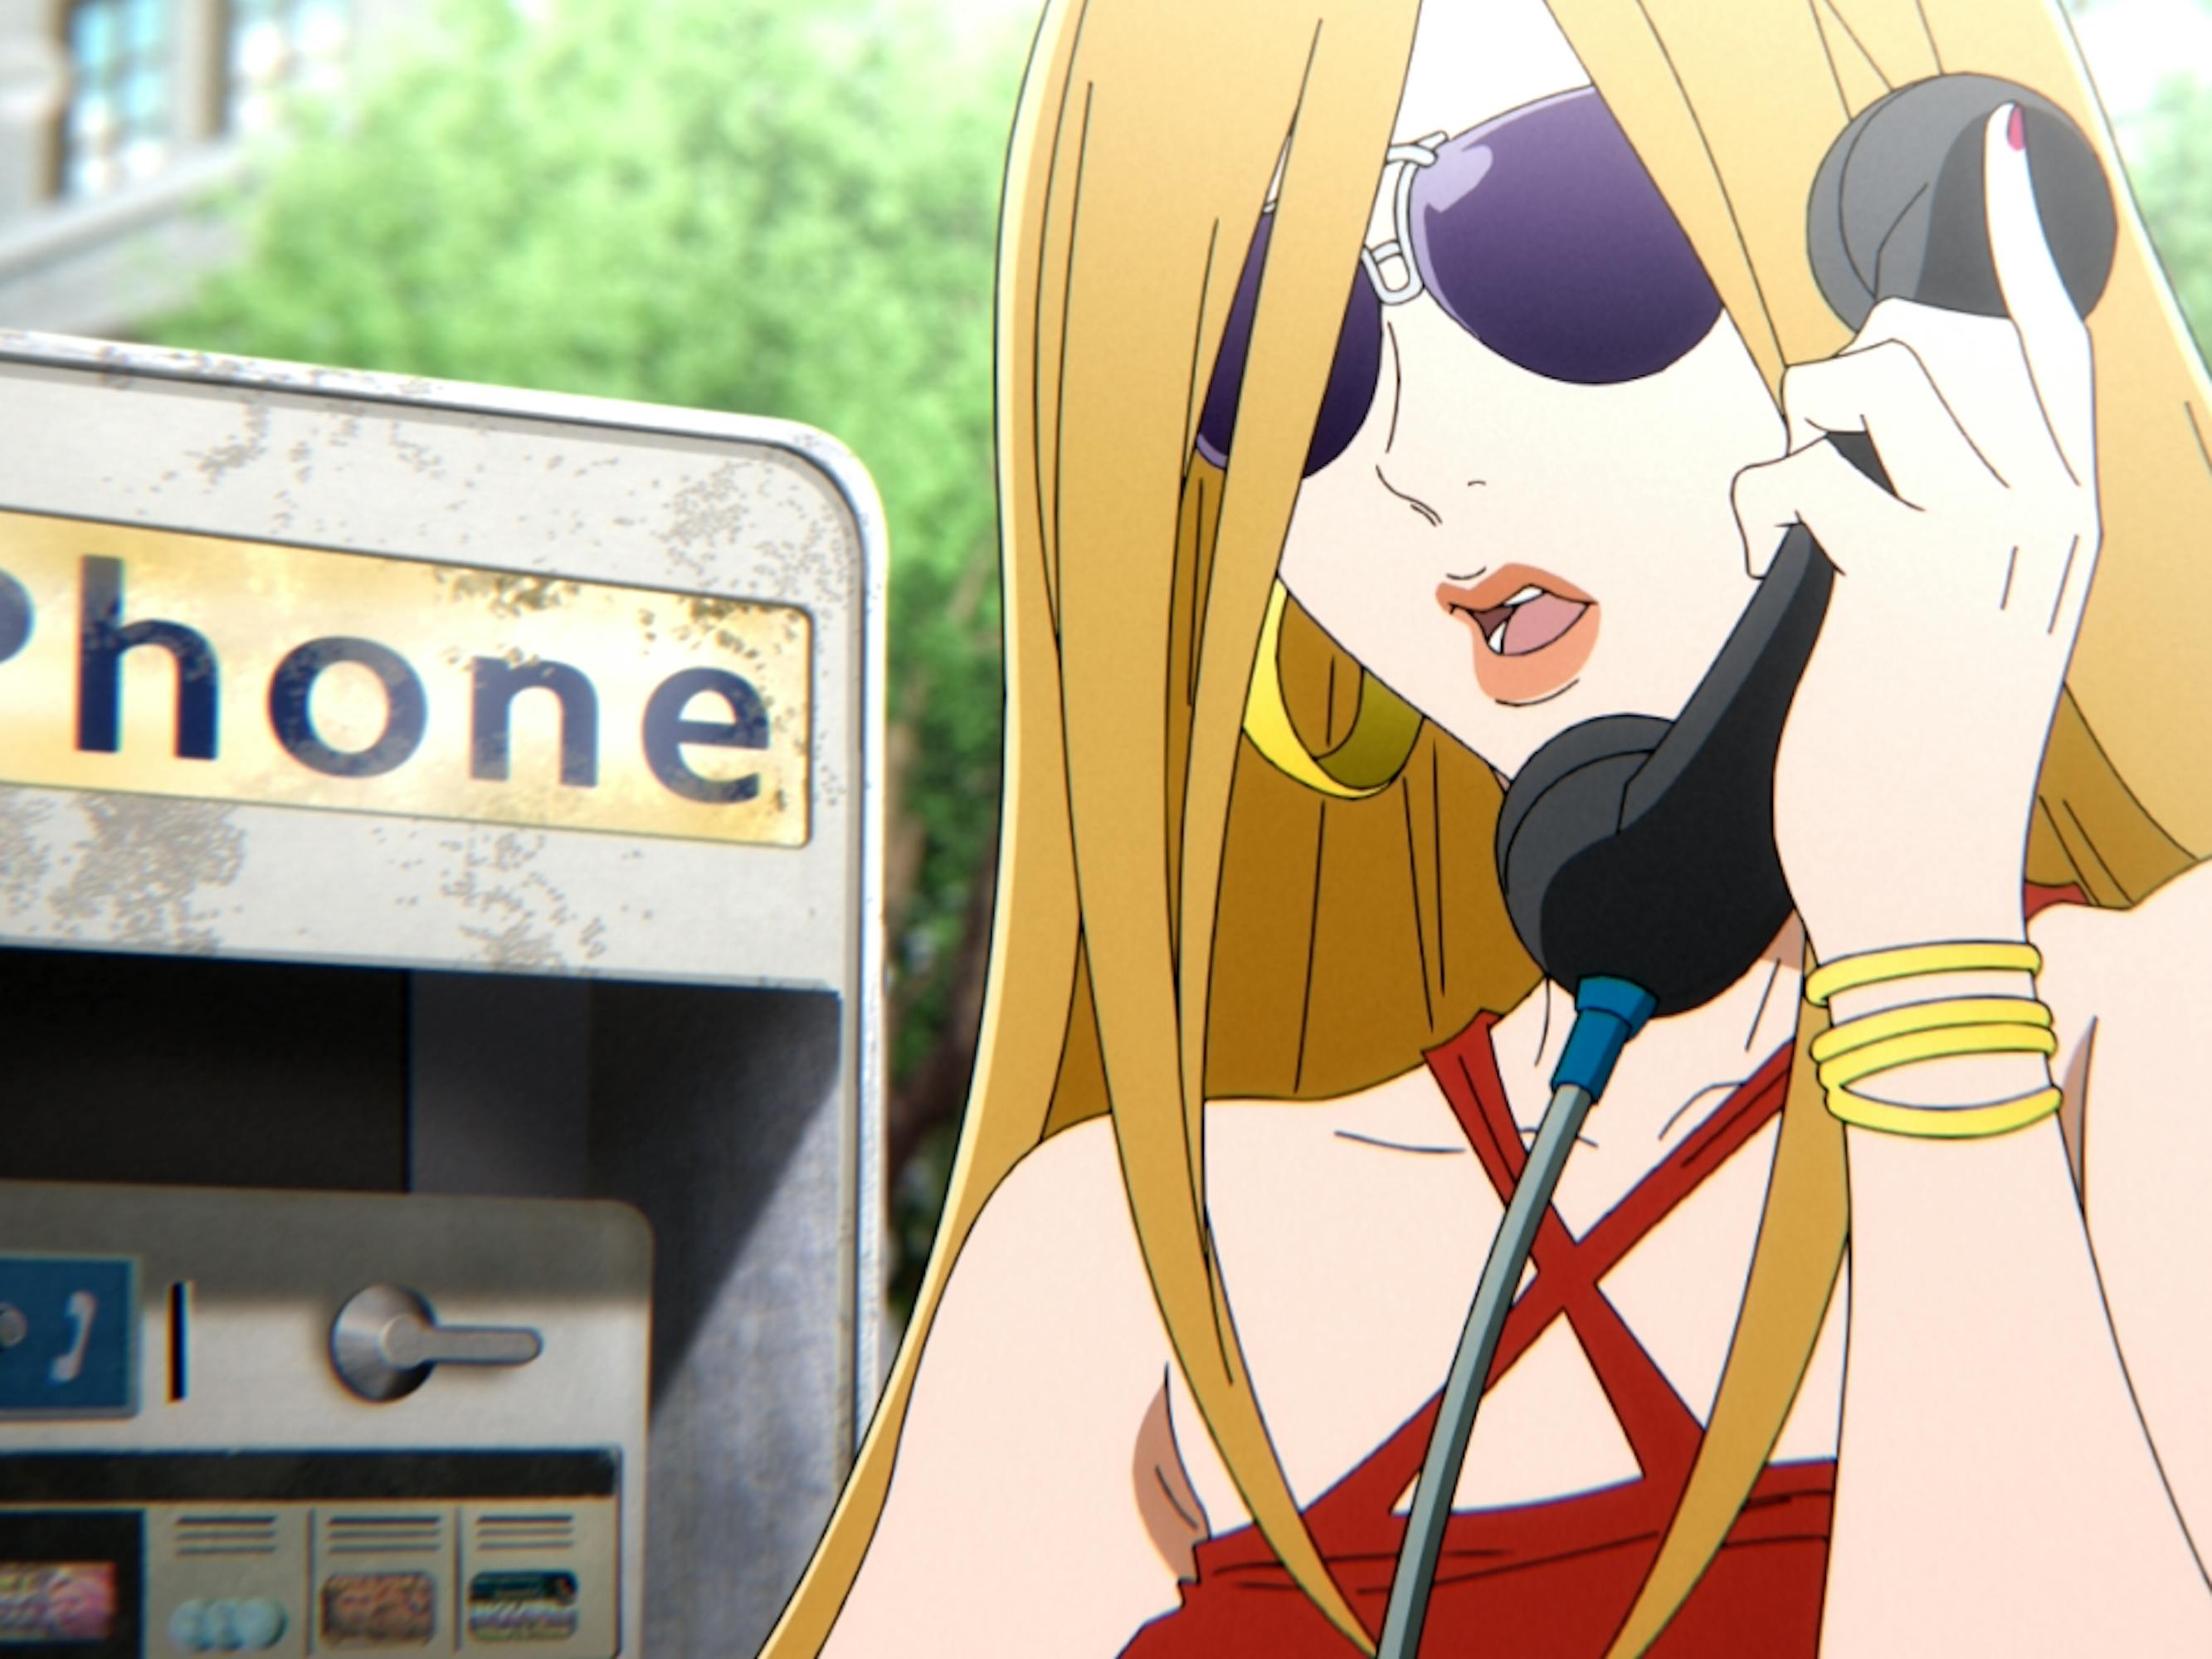 A woman with blond hair and purple sunglasses and talks on a payphone.